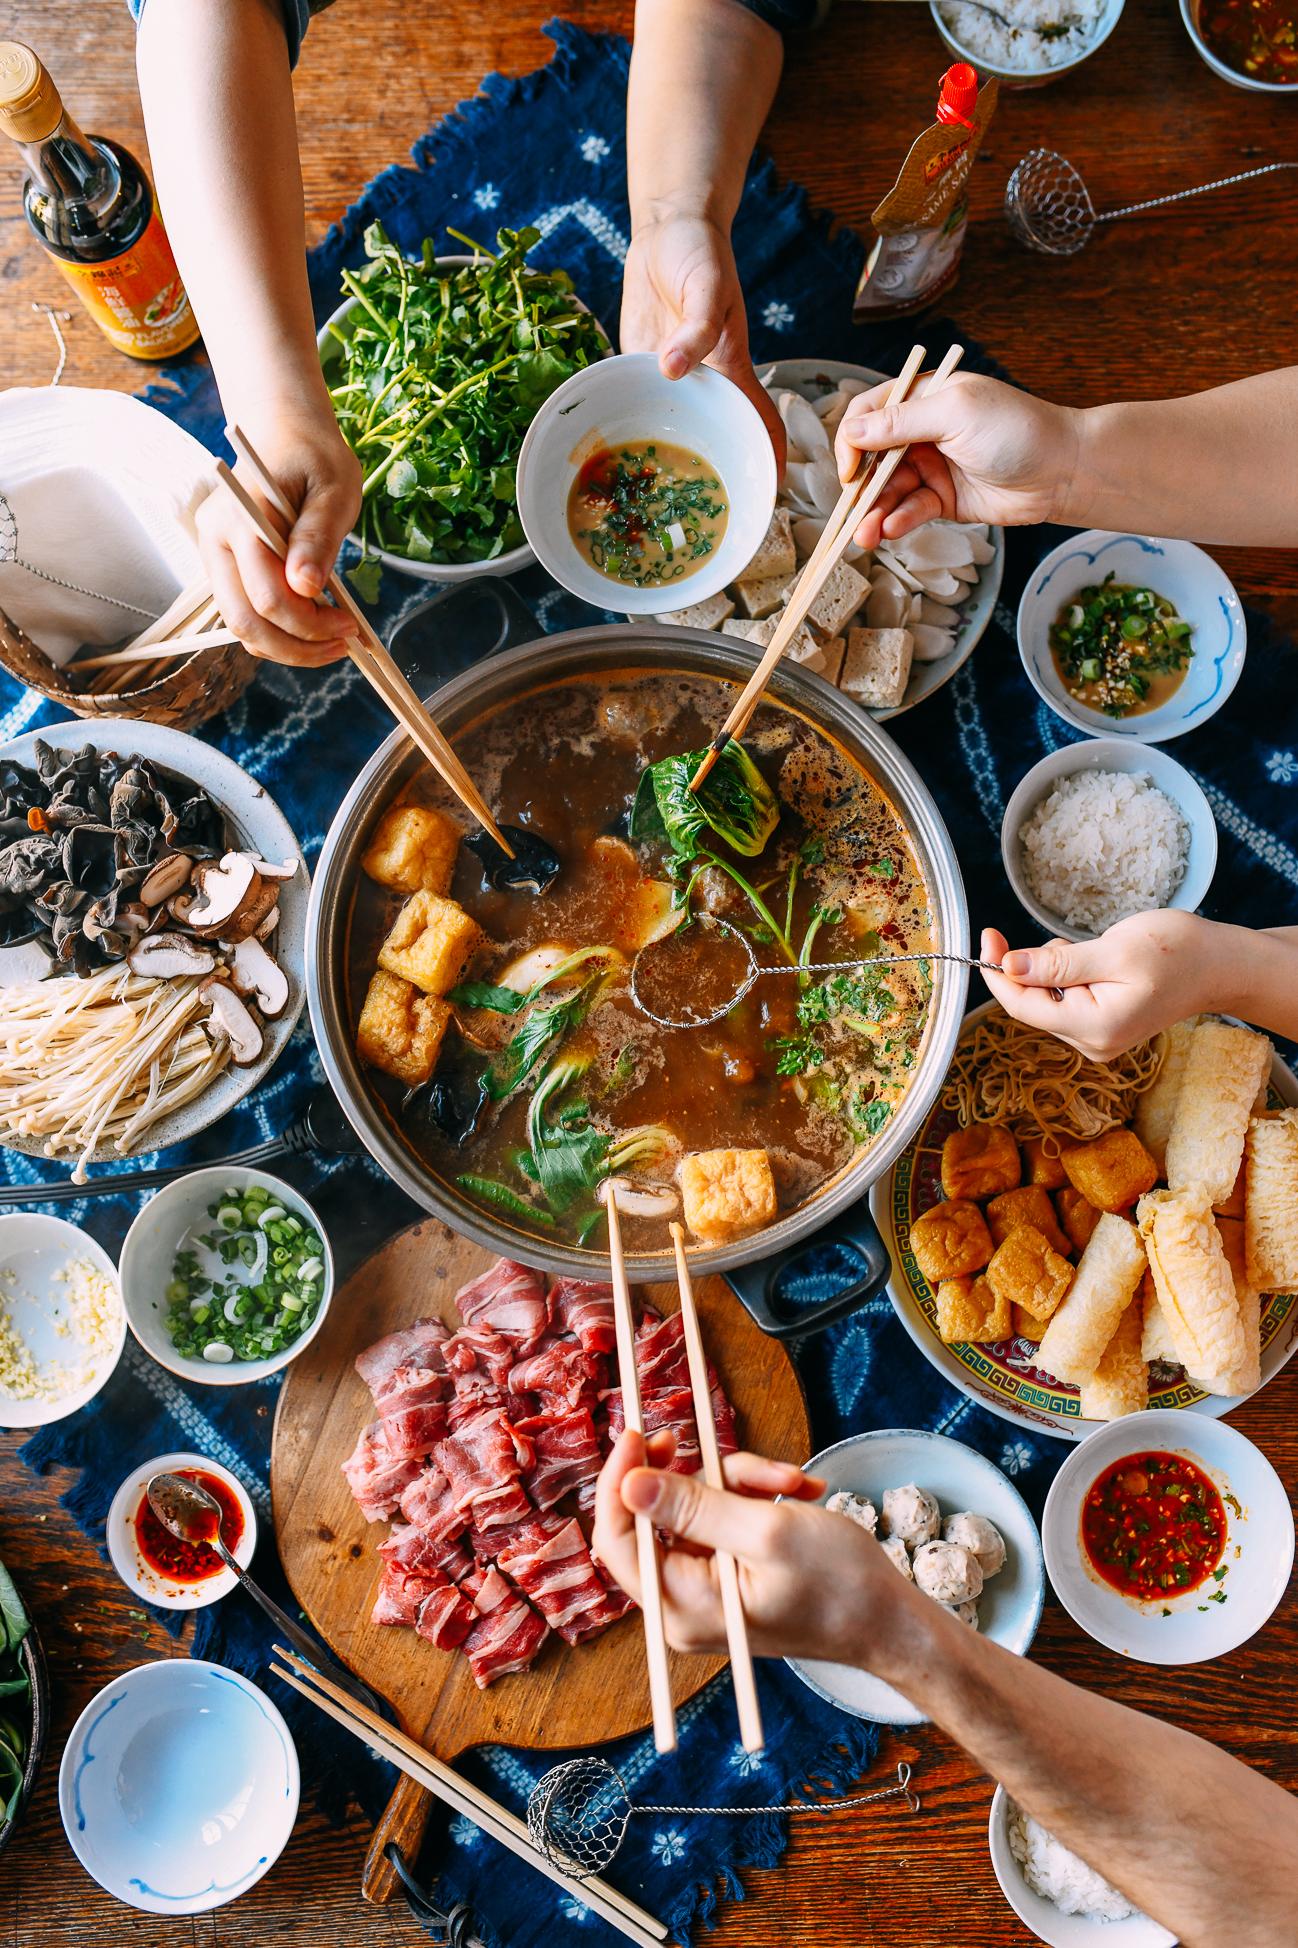 Spicy Chinese Hot Pot Recipe – A Mouth-Watering Delight!